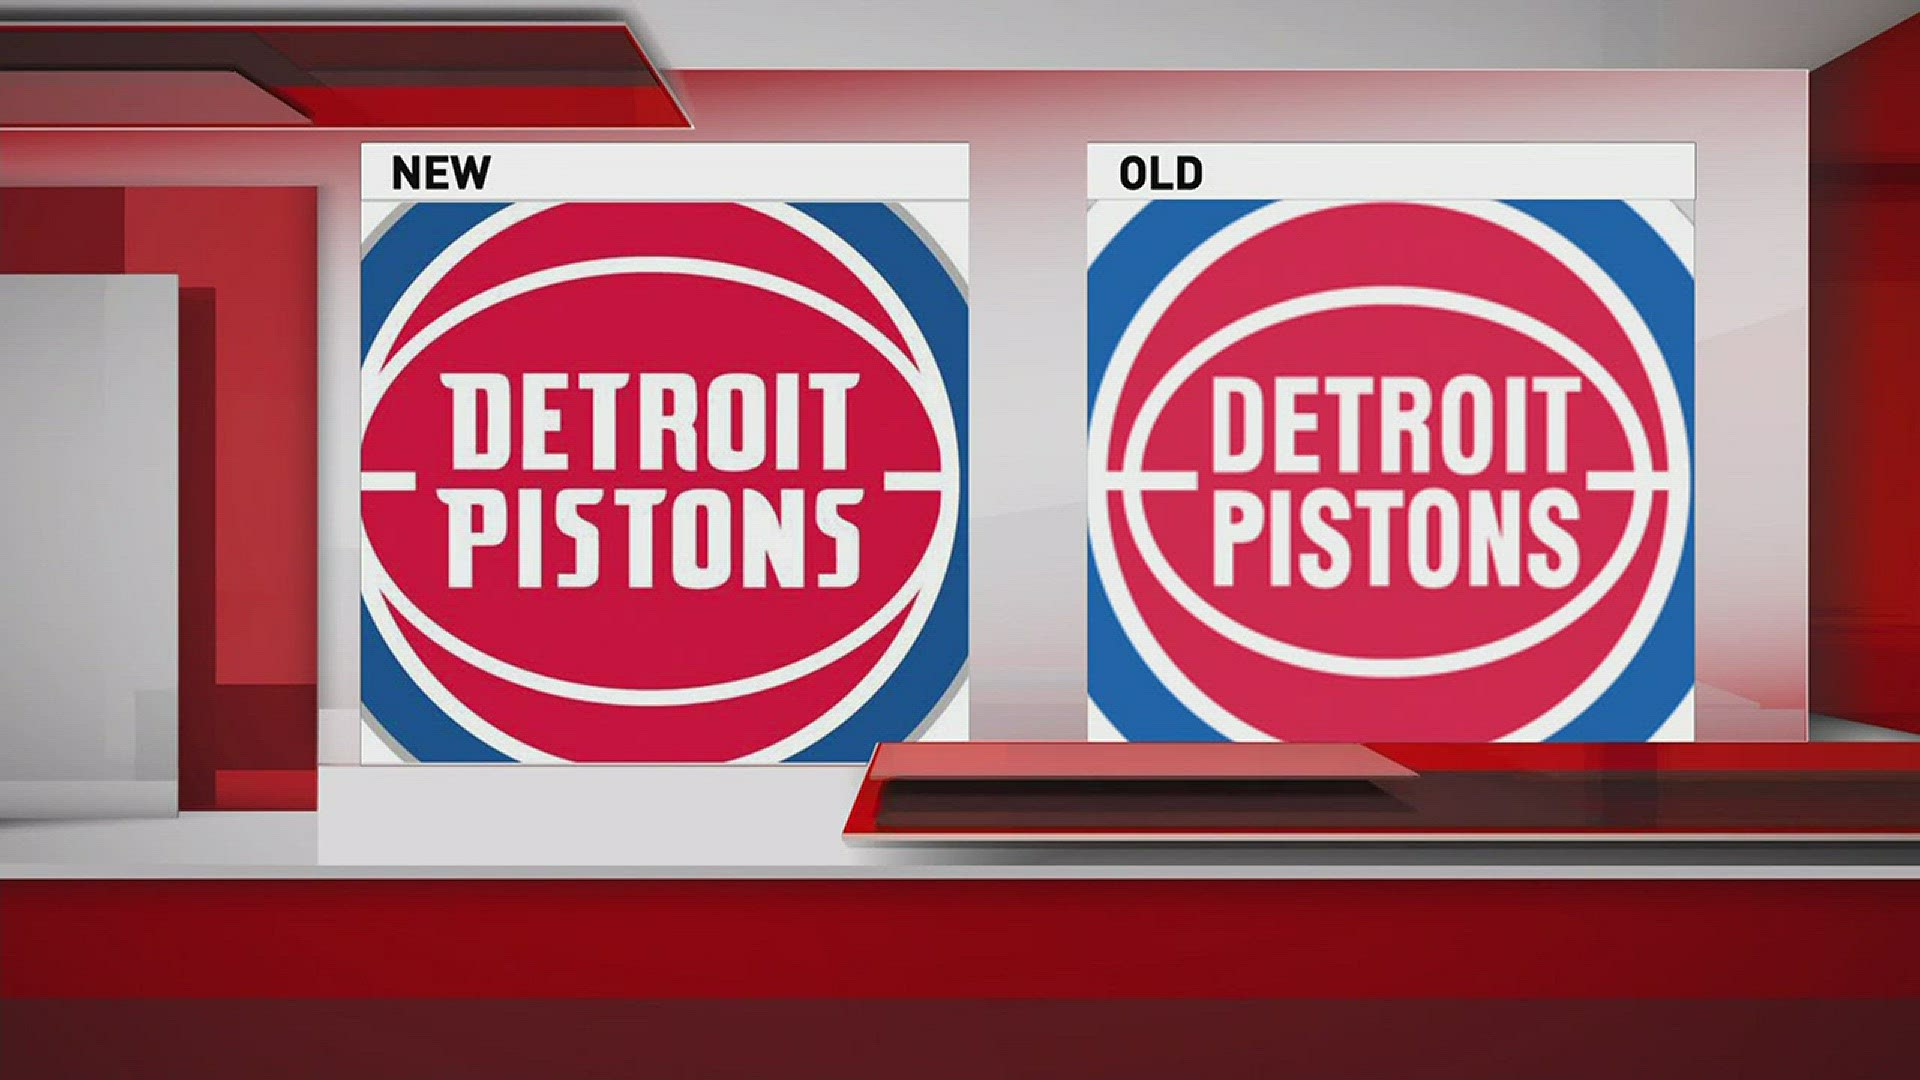 The Detroit Pistons have a new logo that looks a lot like one of their old logos.